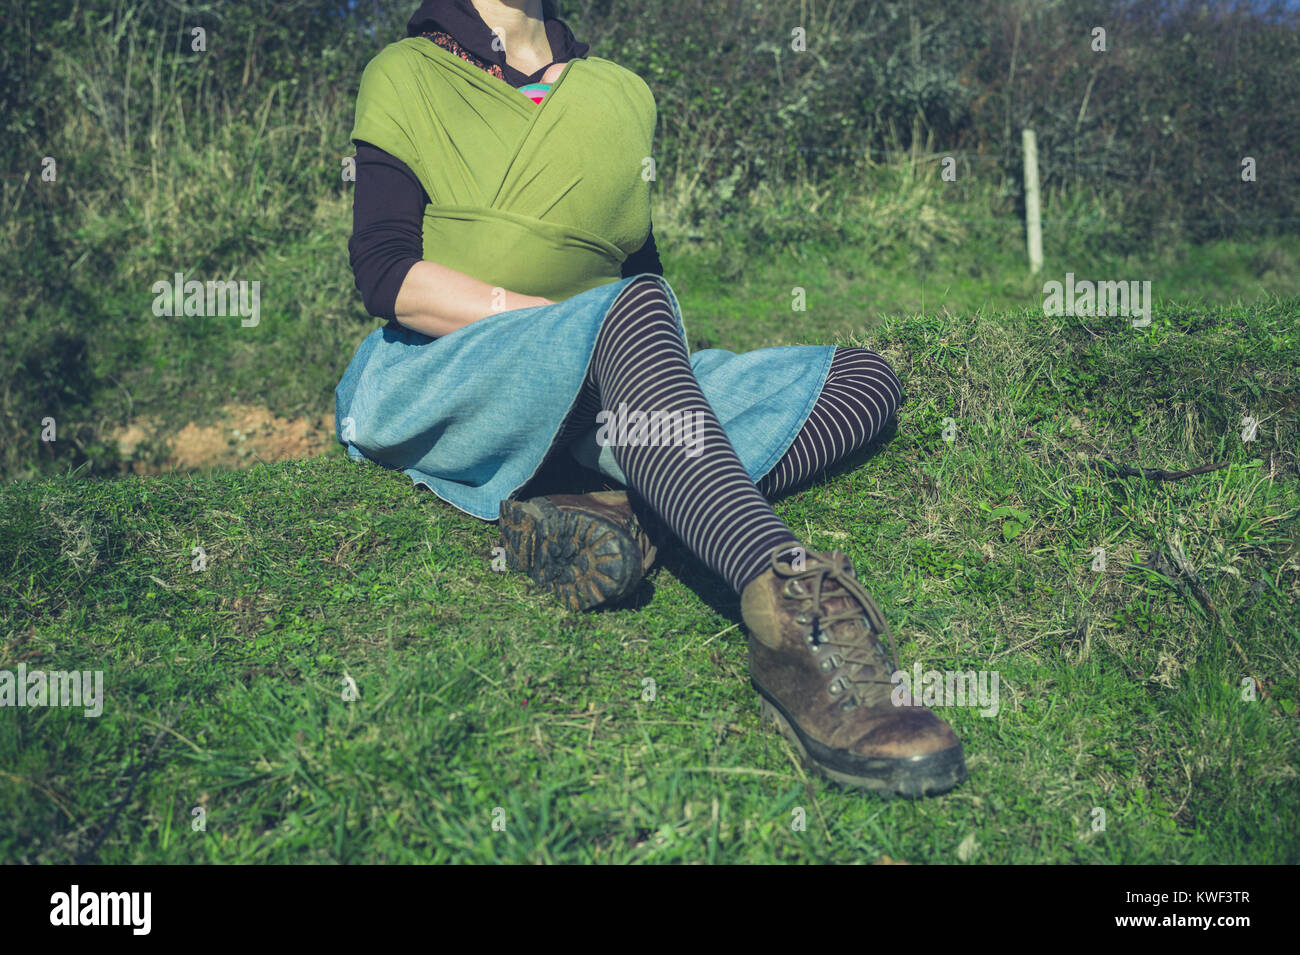 A young woman with a baby in a sling is sitting on the grass outside Stock Photo